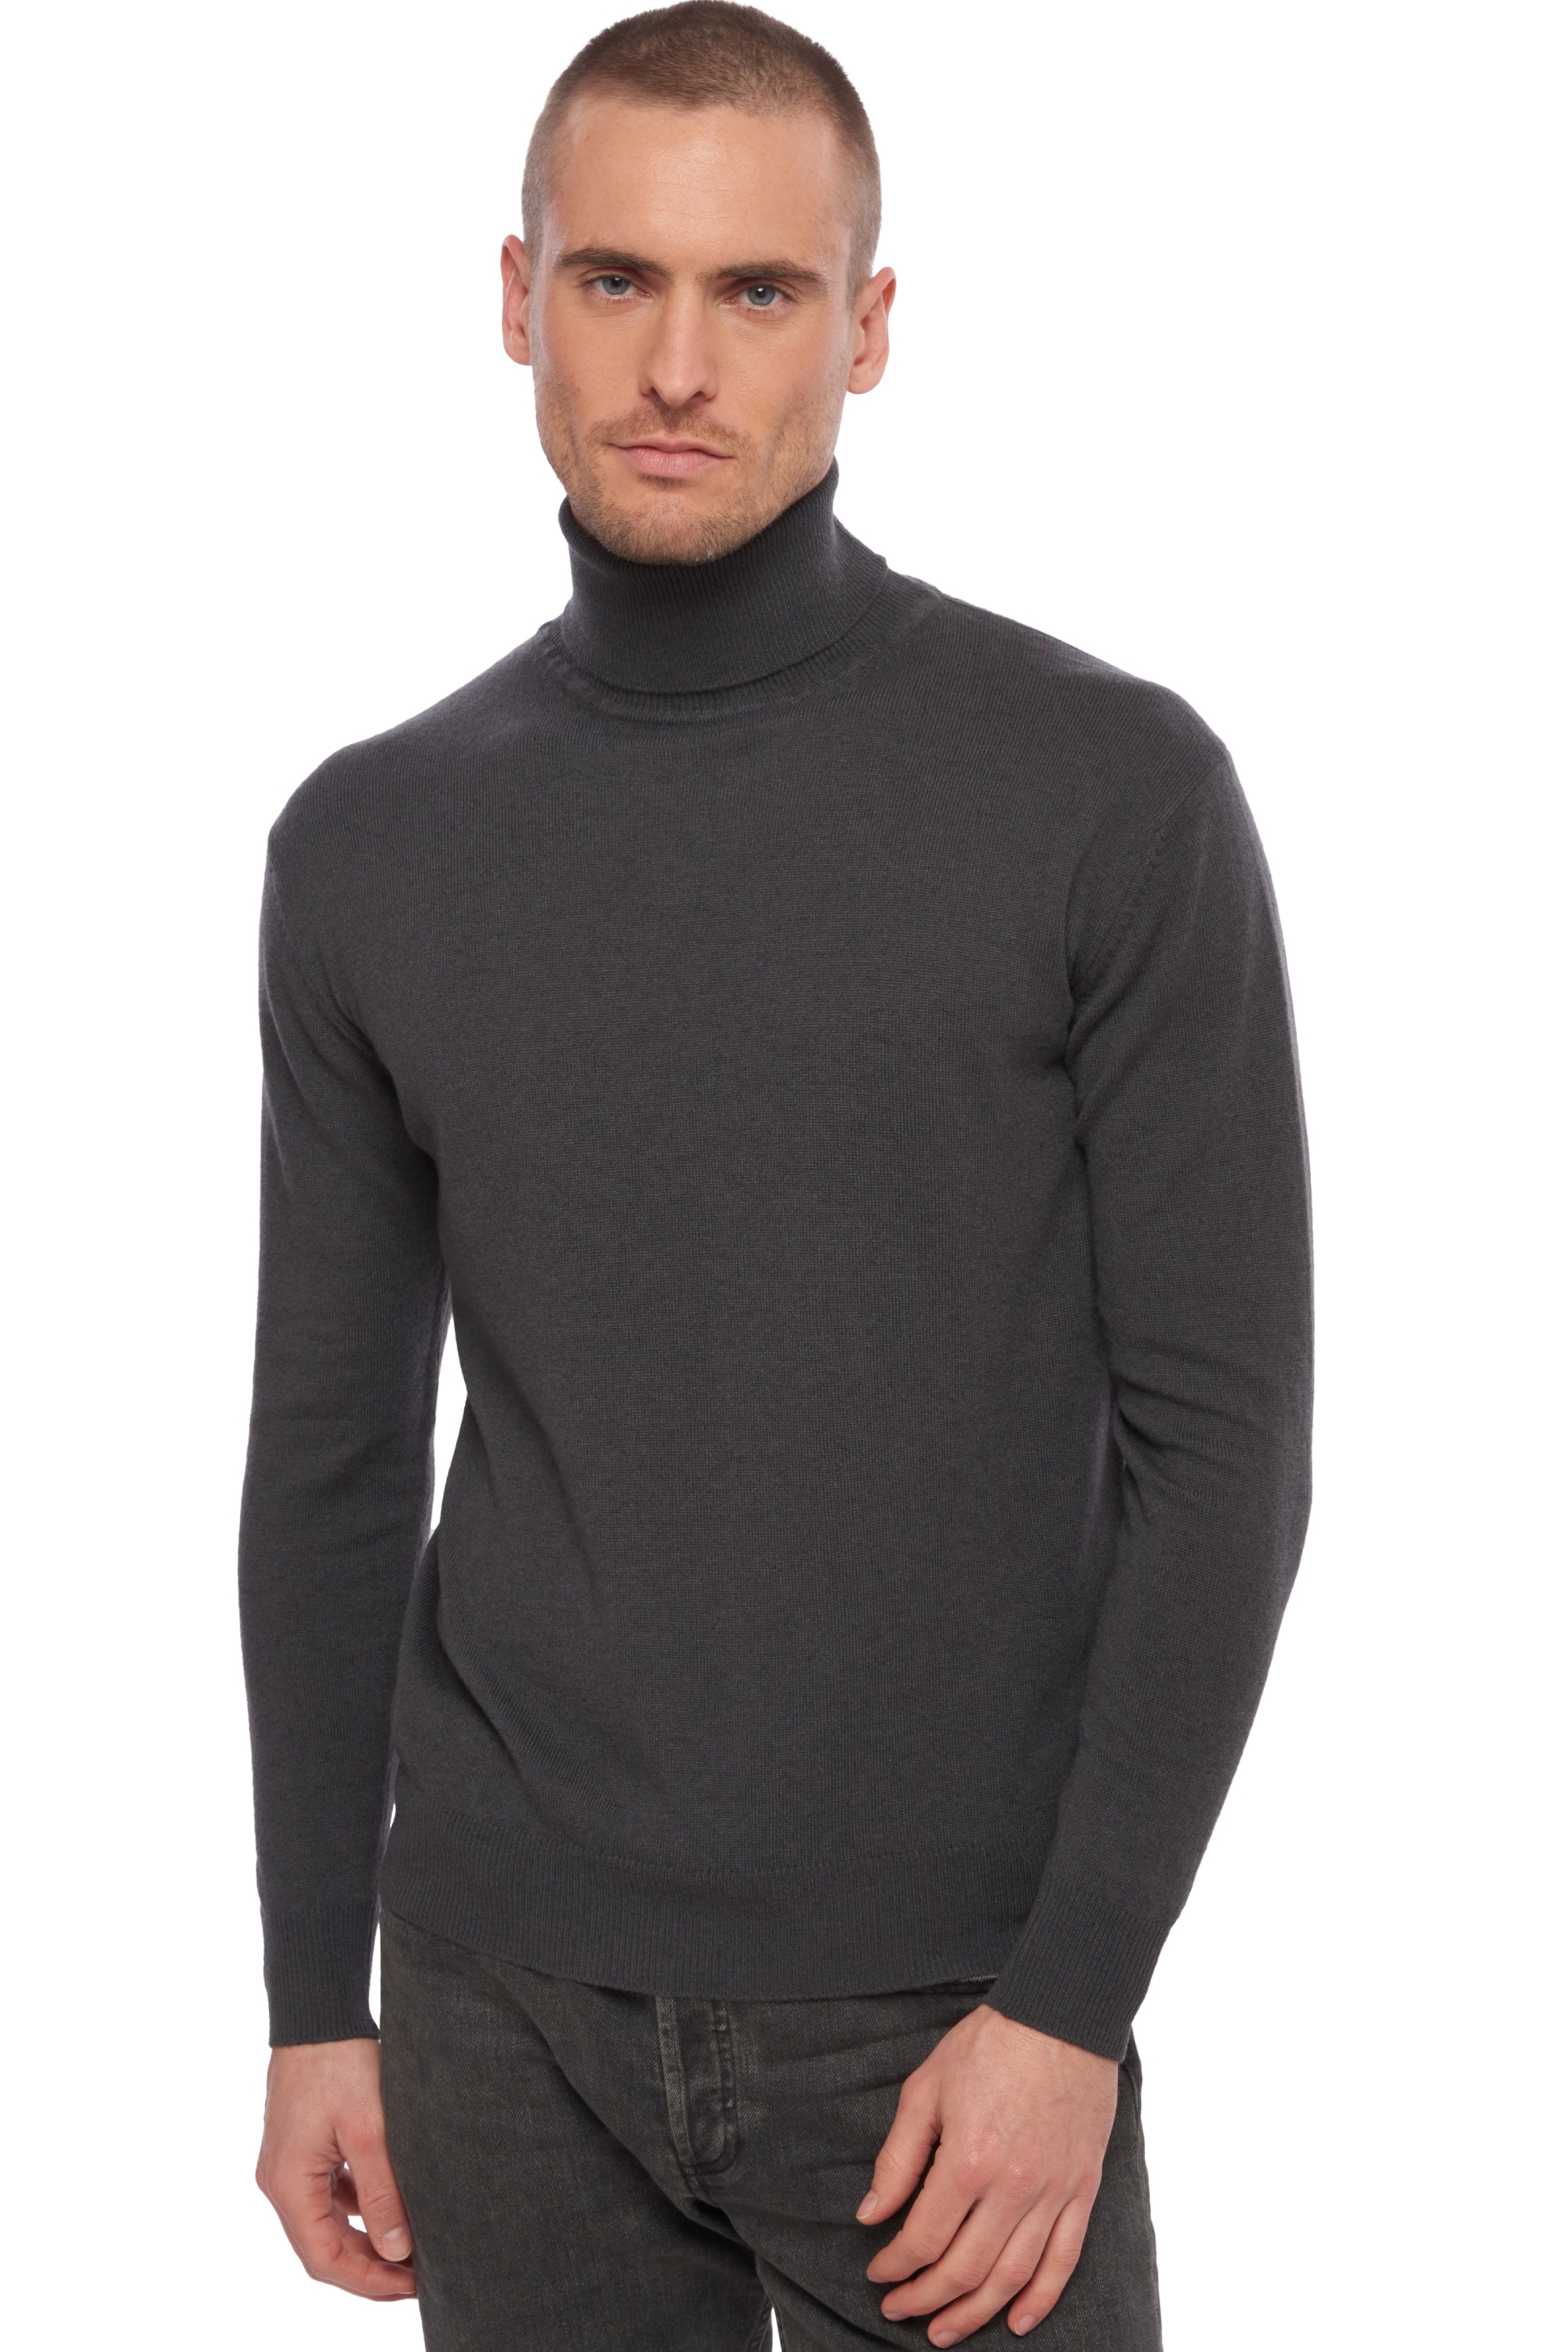 Cachemire pull homme col roule edgar anthracite 4xl